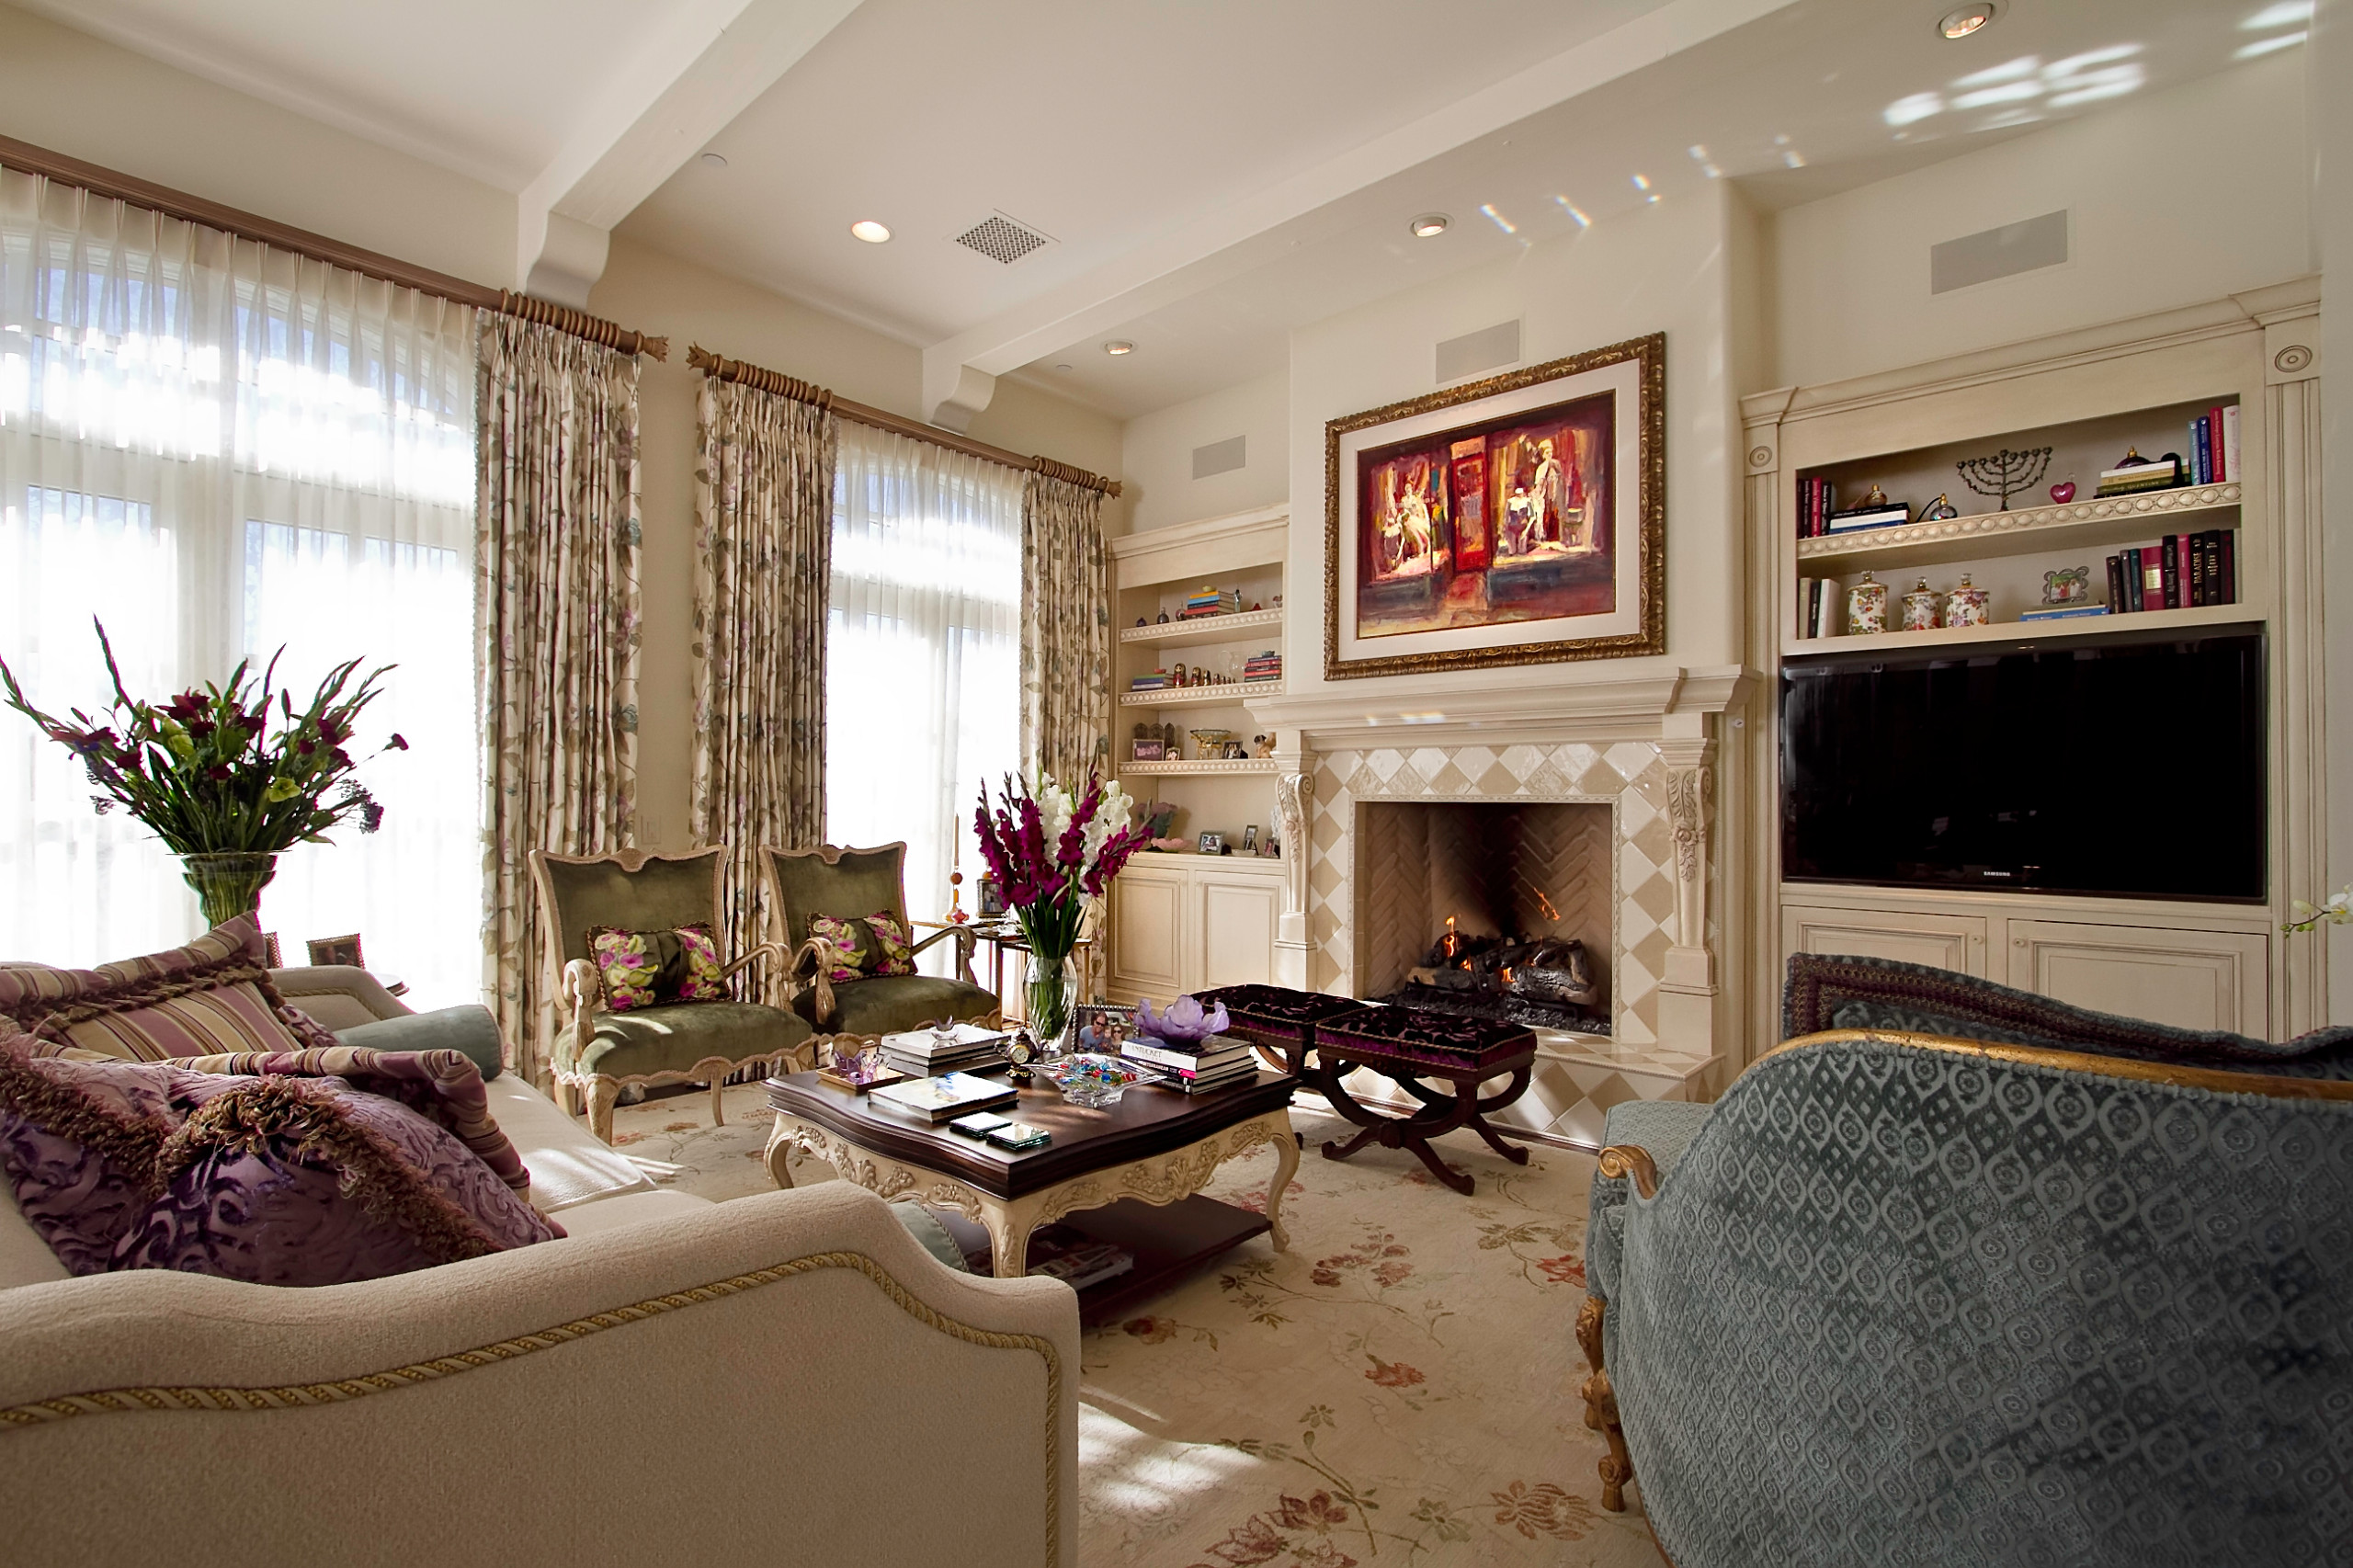 * 2011 THIRD PLACE - ASID - RESIDENTIAL * Scottsdale Elegance